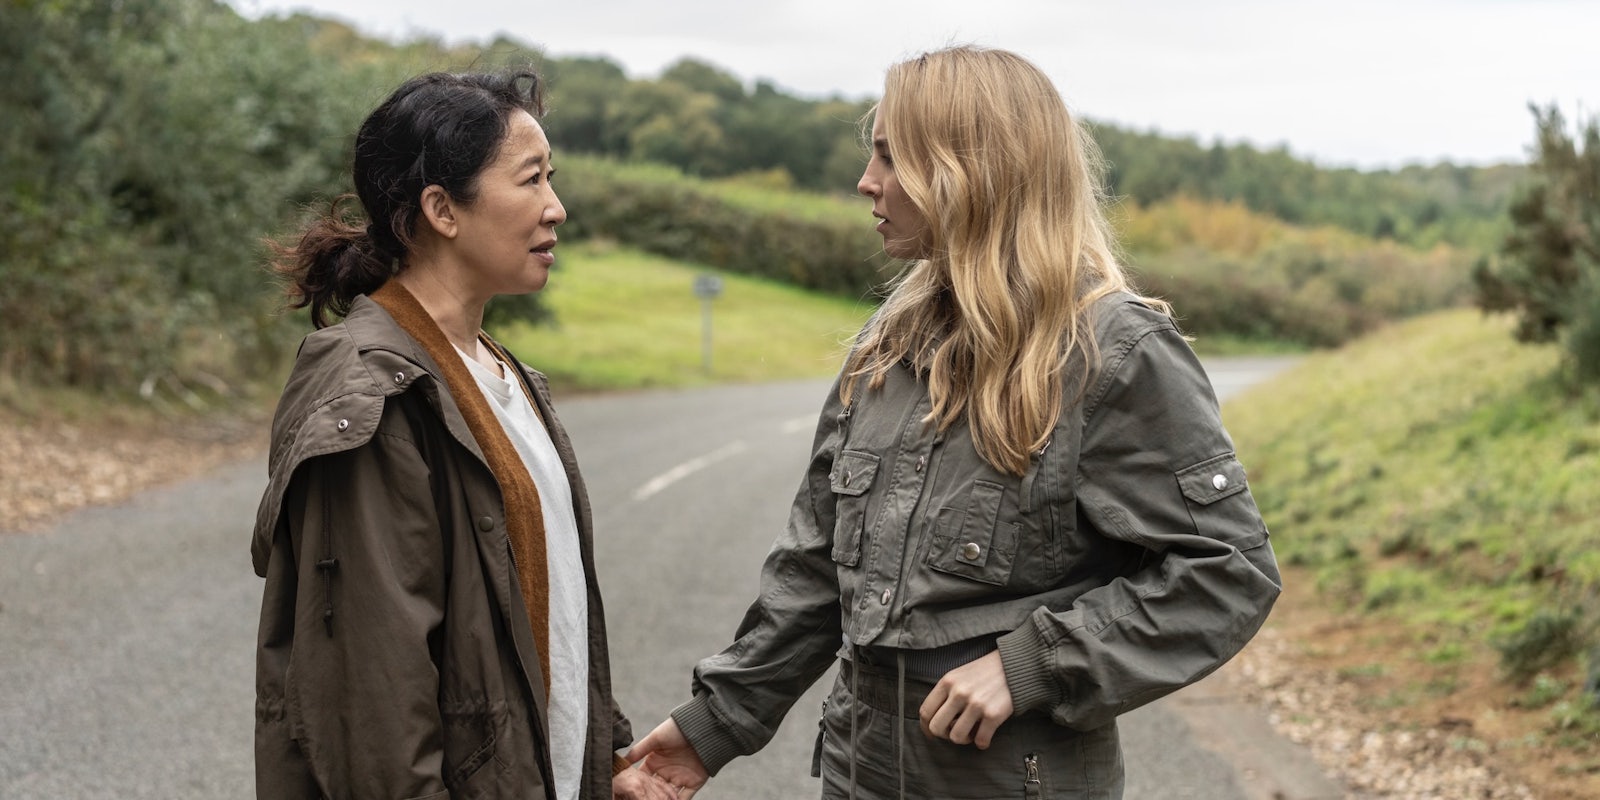 sandra oh (left) and jodie comer (right) in killing eve season 4